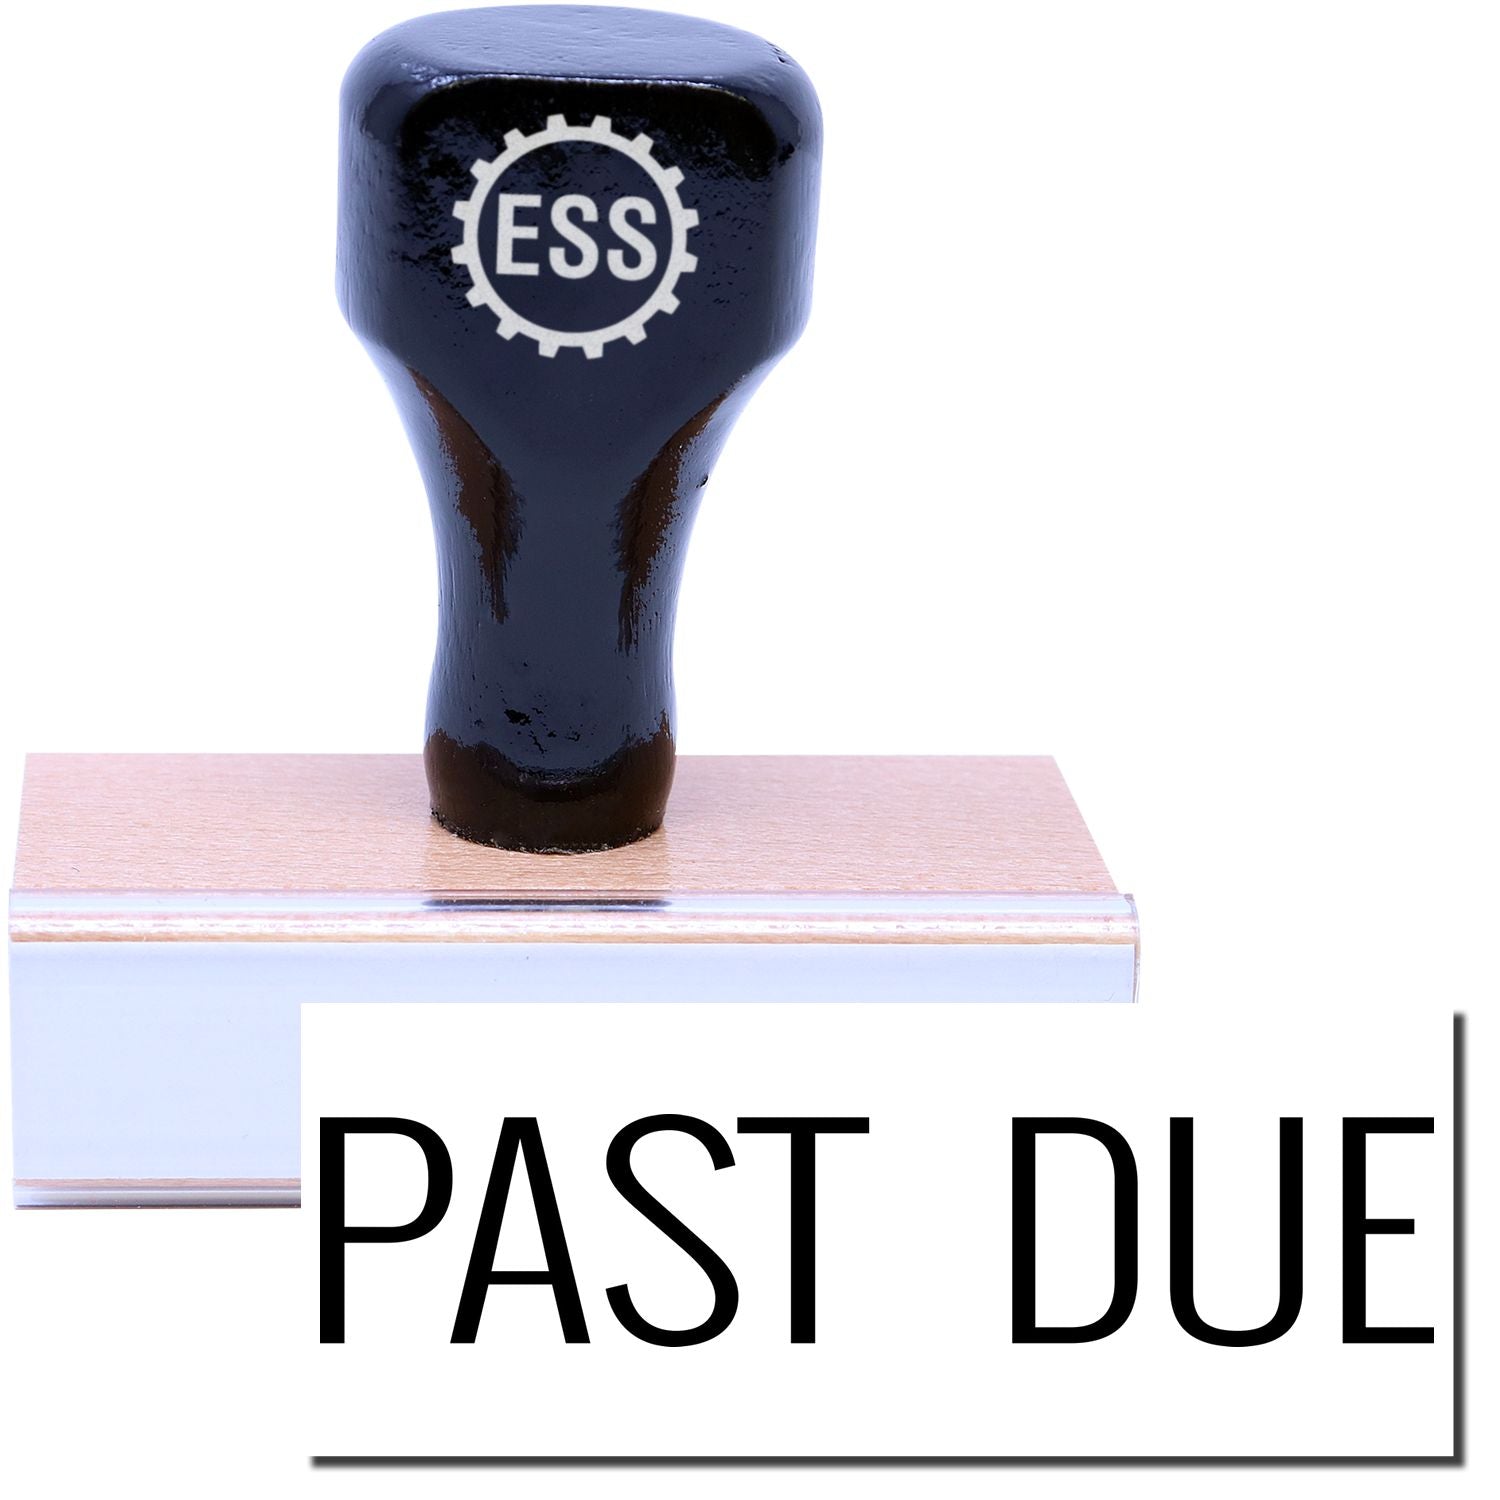 A stock office rubber stamp with a stamped image showing how the text "PAST DUE" in a large narrow font is displayed after stamping.